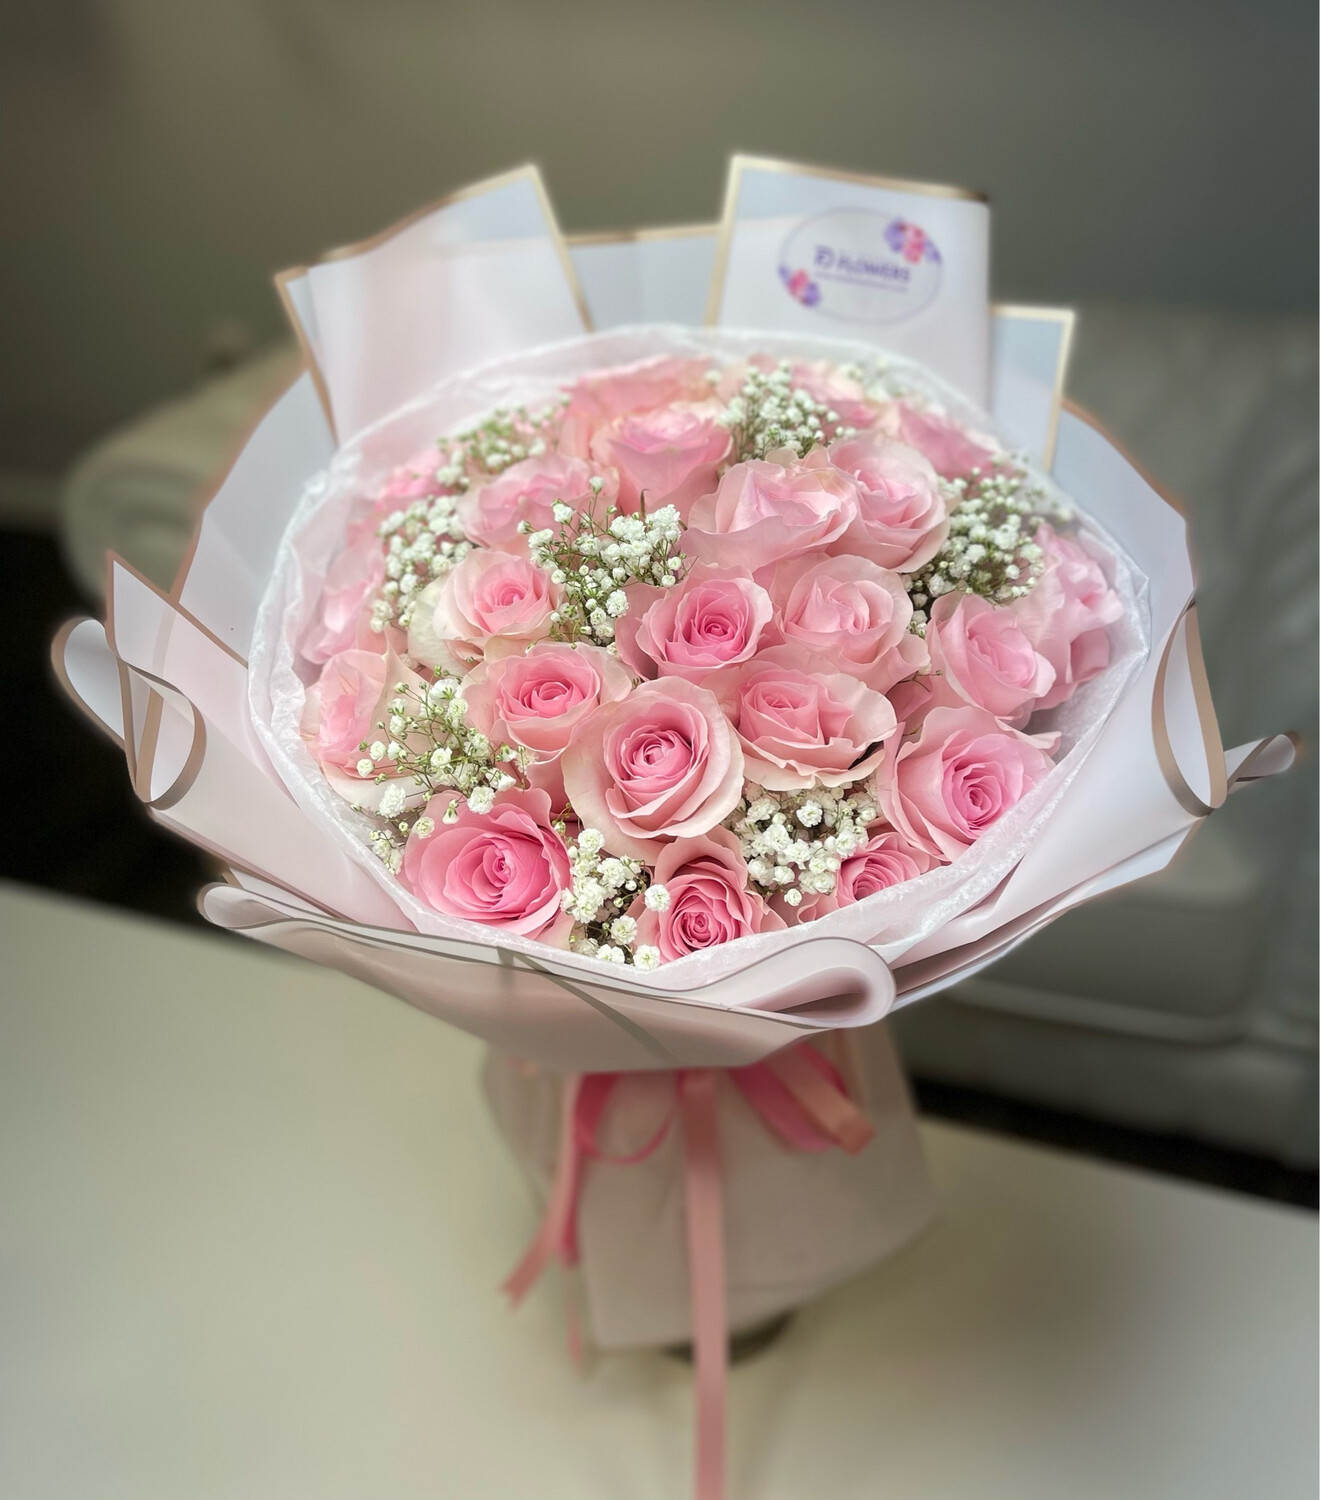 23 Pink Roses